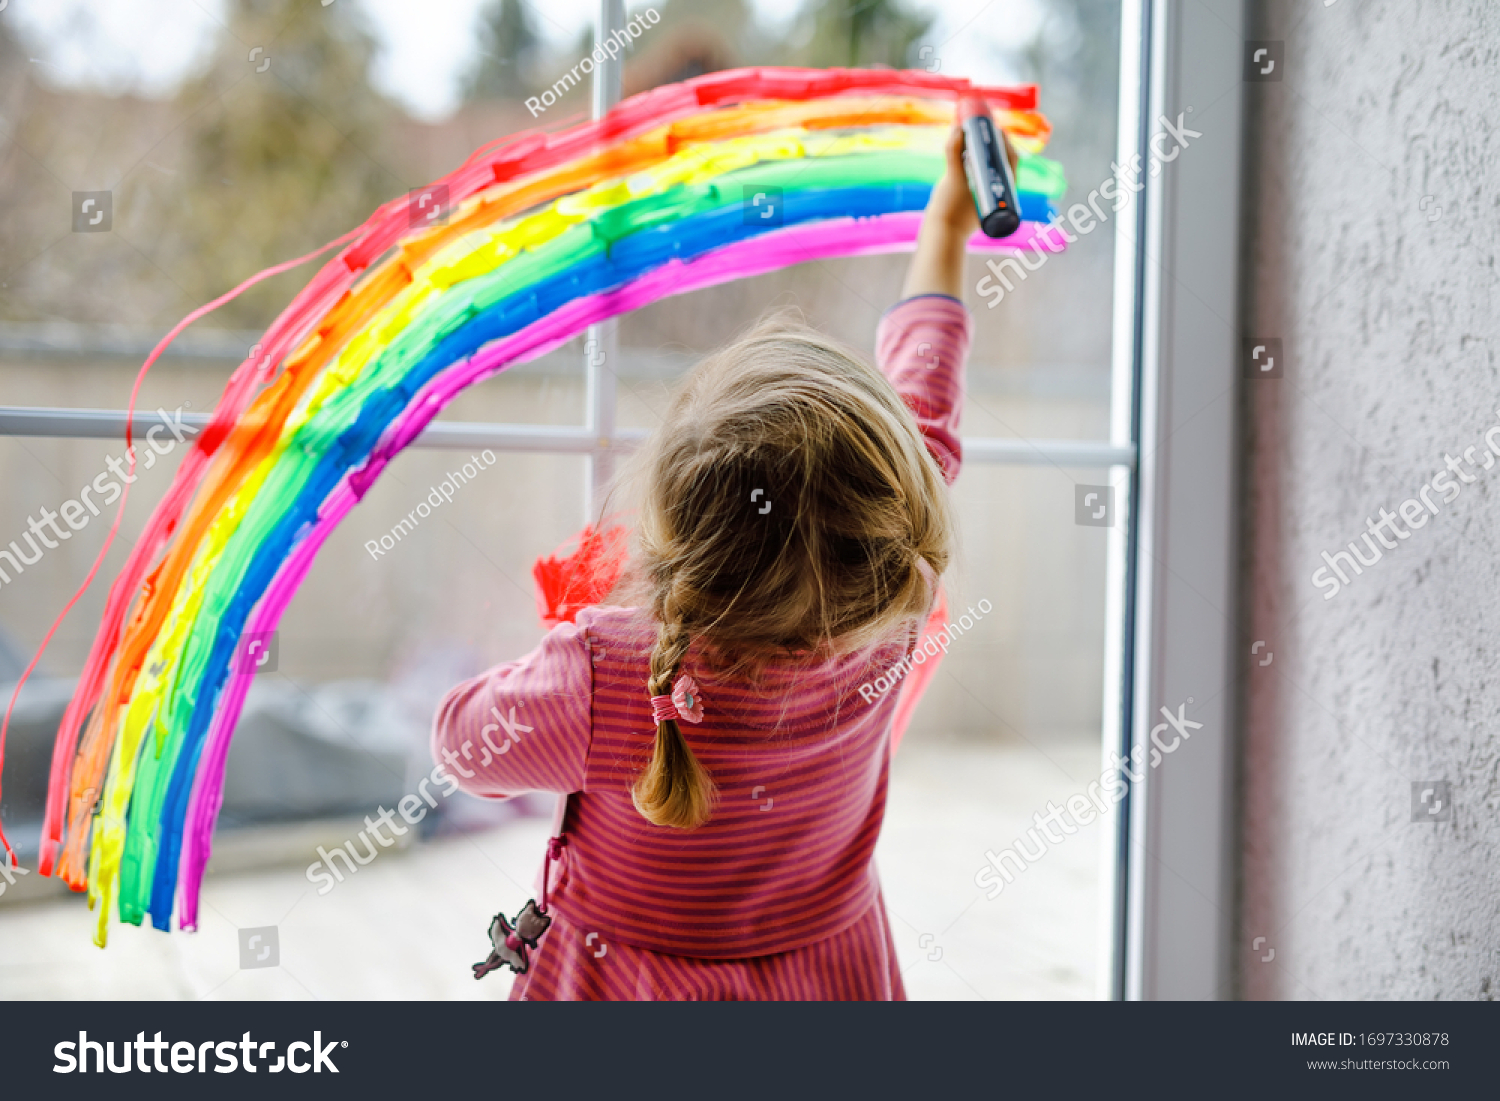 Adoralbe little toddler girl with rainbow painted with colorful window color during pandemic coronavirus quarantine. Child painting rainbows around the world with the words Let's all be well. #1697330878